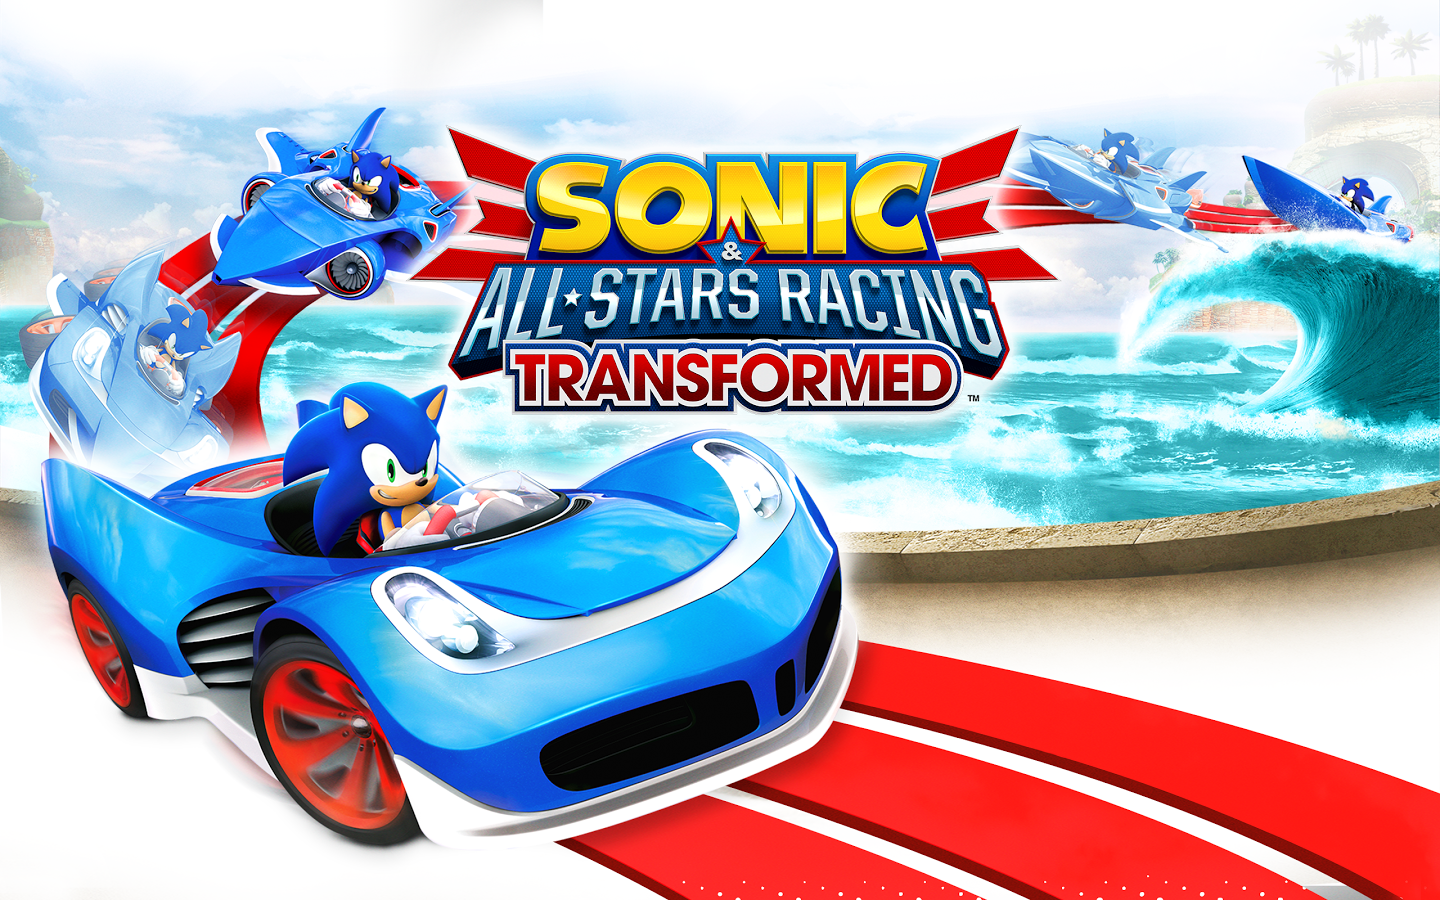 Sonic & All Stars Racing Transformed For PC Review